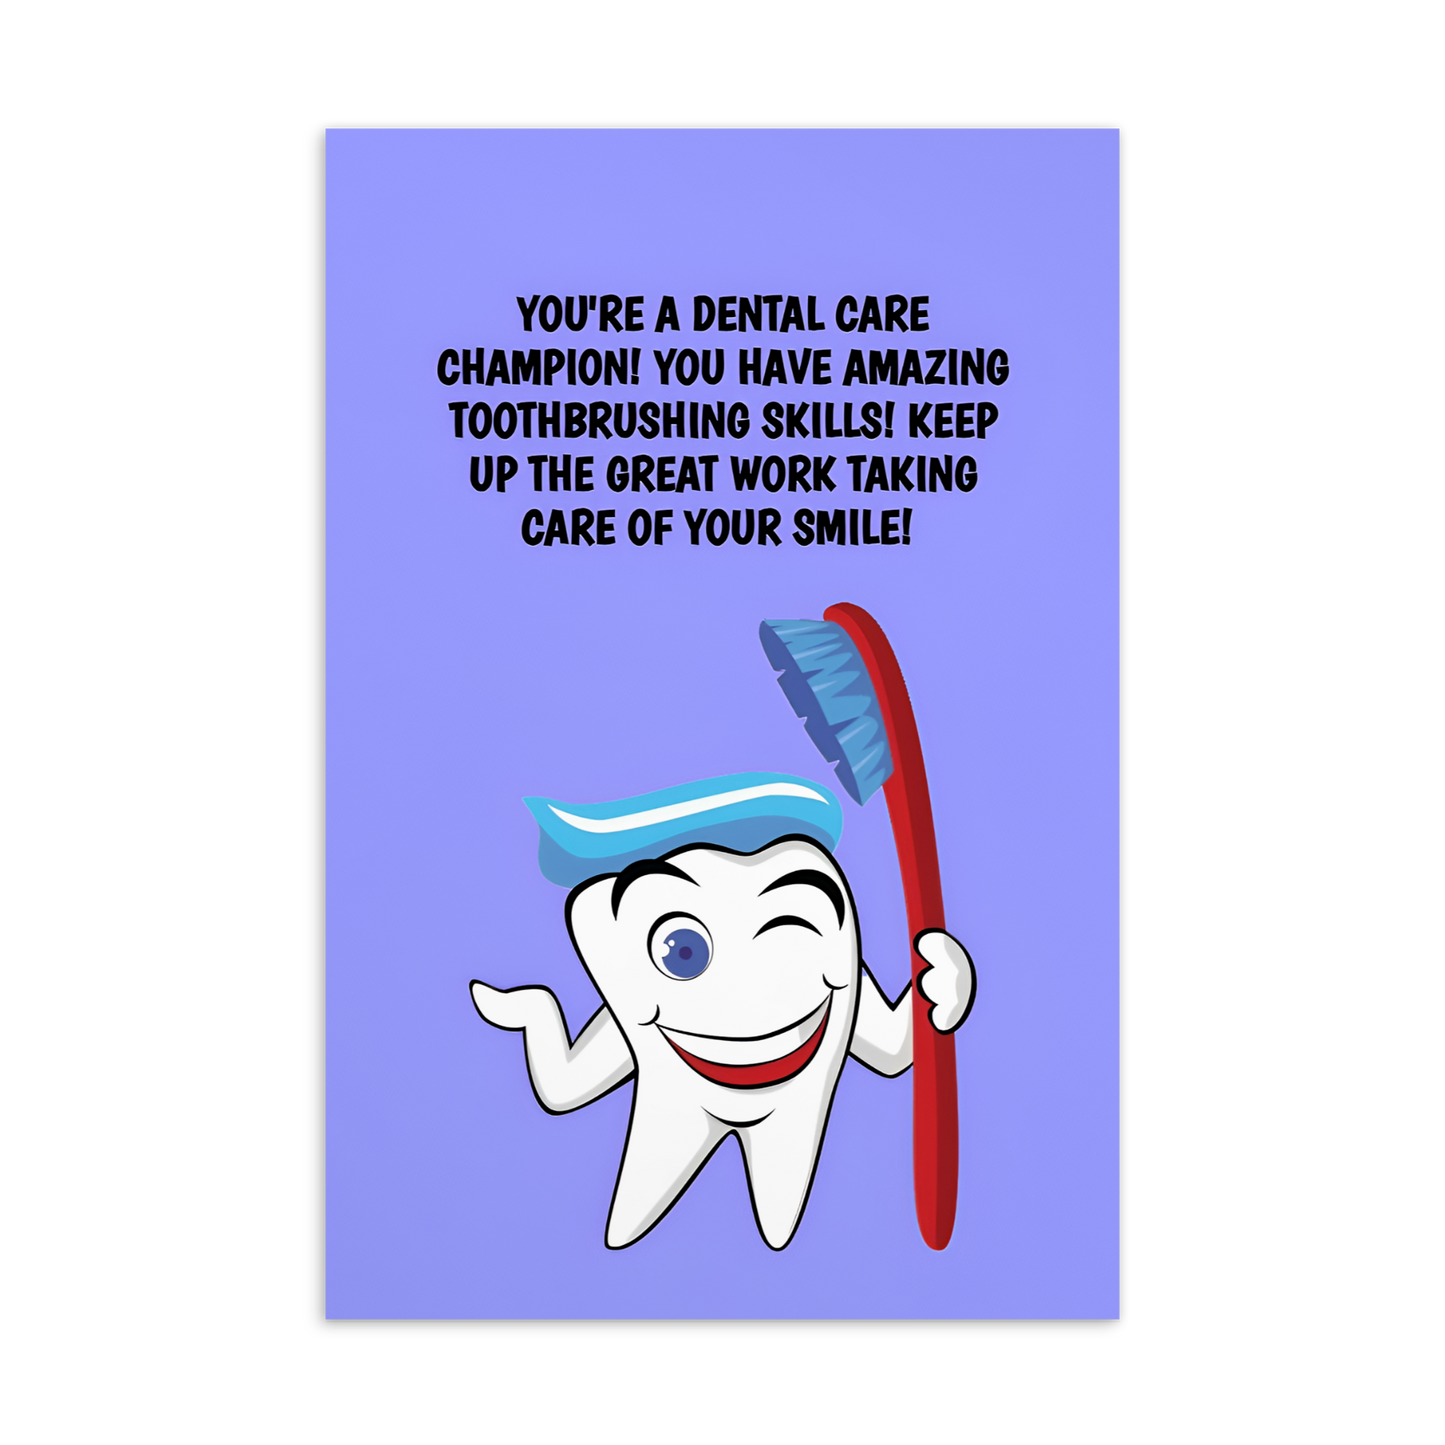 Dental Motivational & Reward Cards- You're A Dental Care Champion! You Have Amazing Toothbrushing Skills!